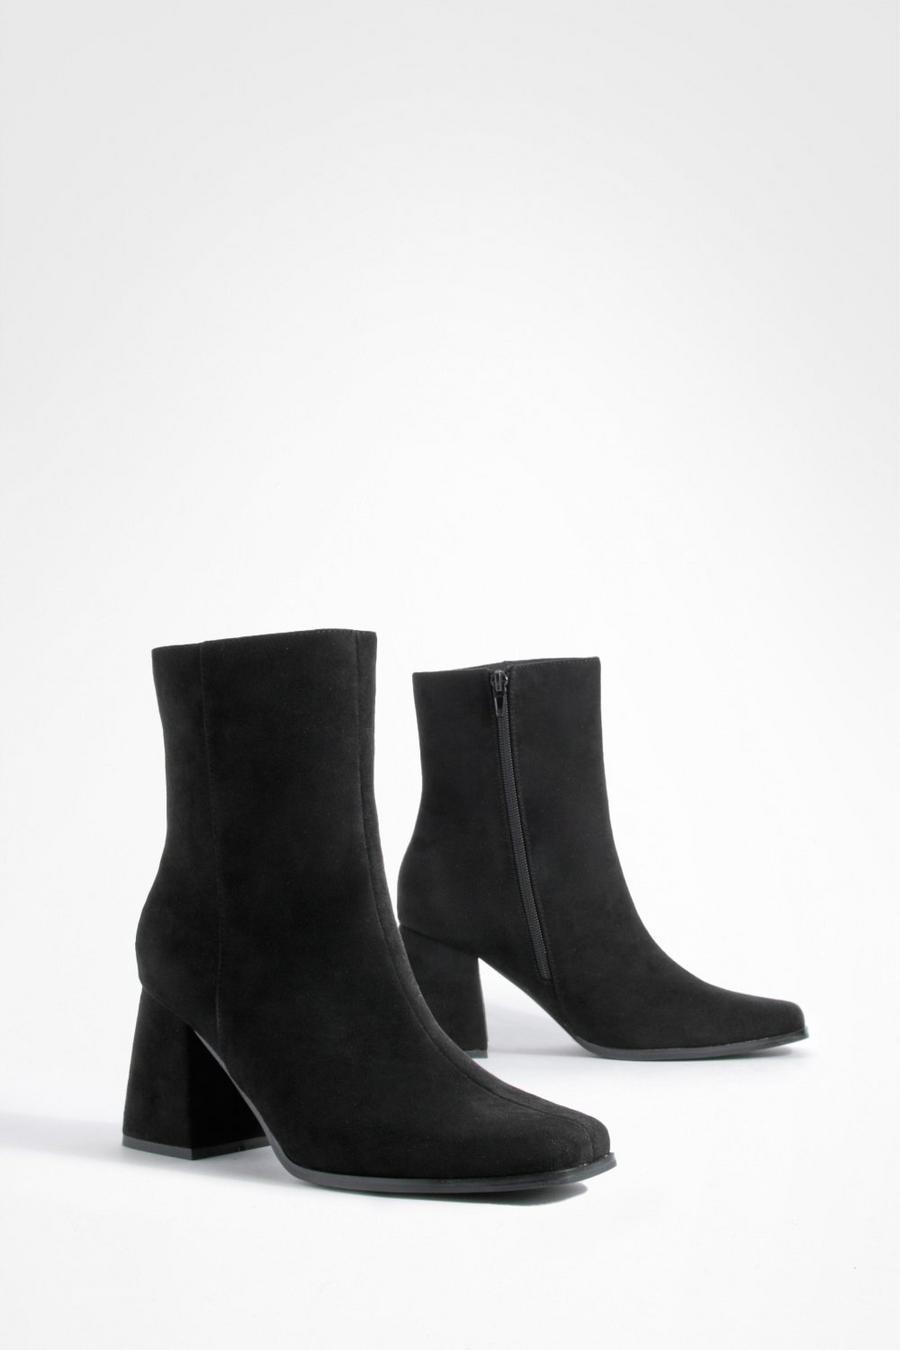 Black Wide Fit Faux Suede Block Heel Ankle Boots   